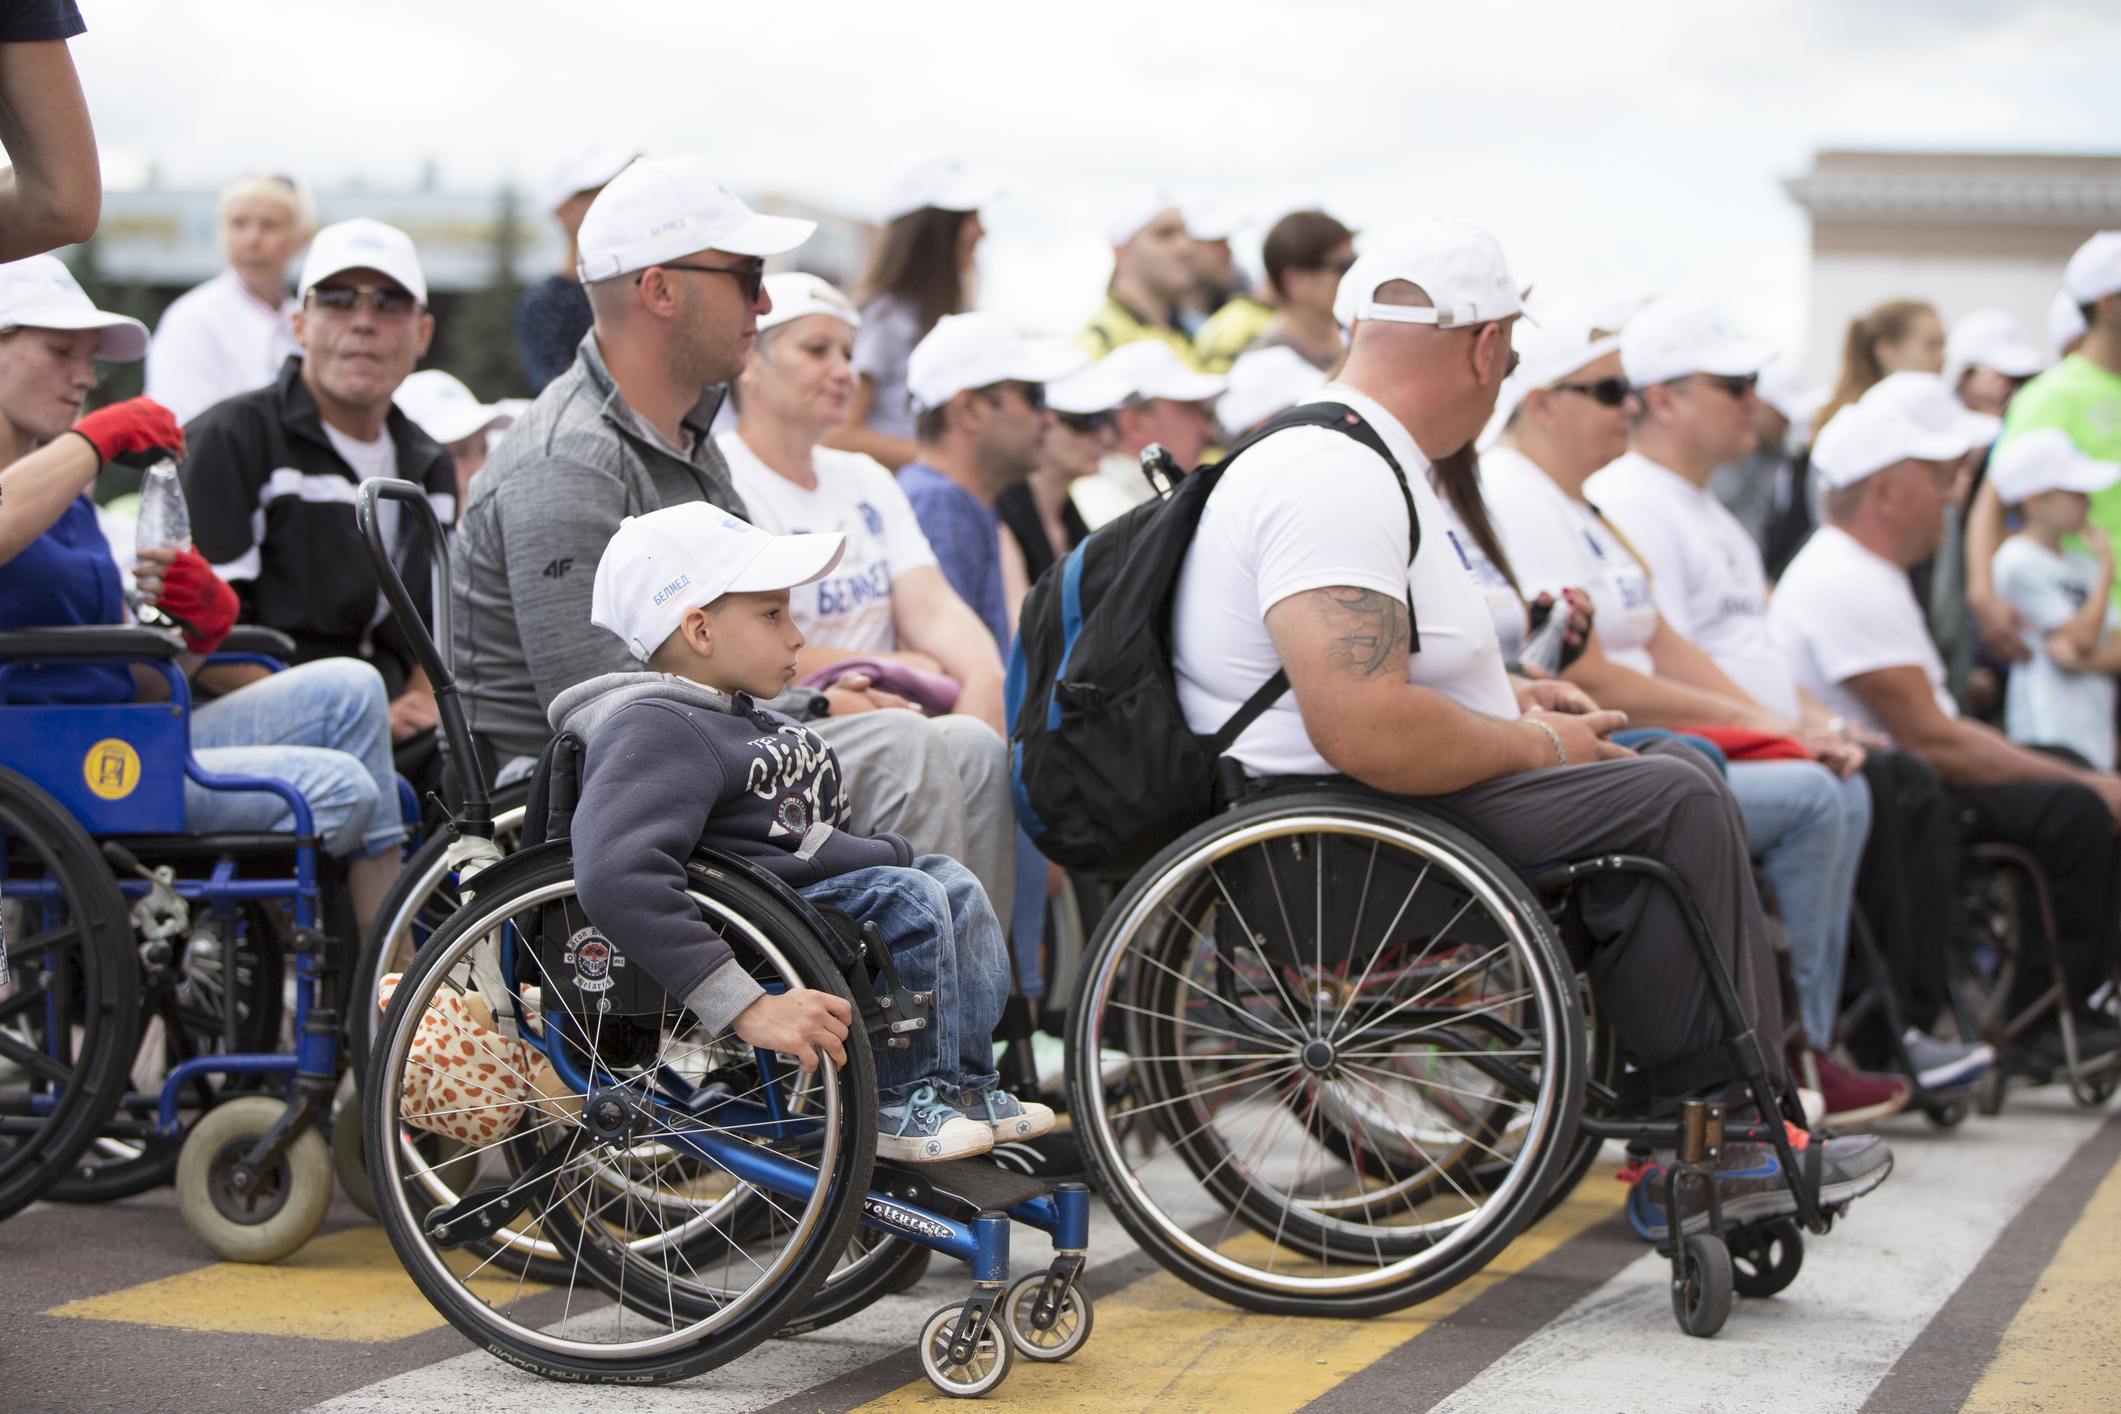 A diverse group of wheelchair users wearing white baseball caps gather for an outdoor charity event. Most are older adults, and there is a young boy in the foreground seated in his wheelchair with a determined expression. 